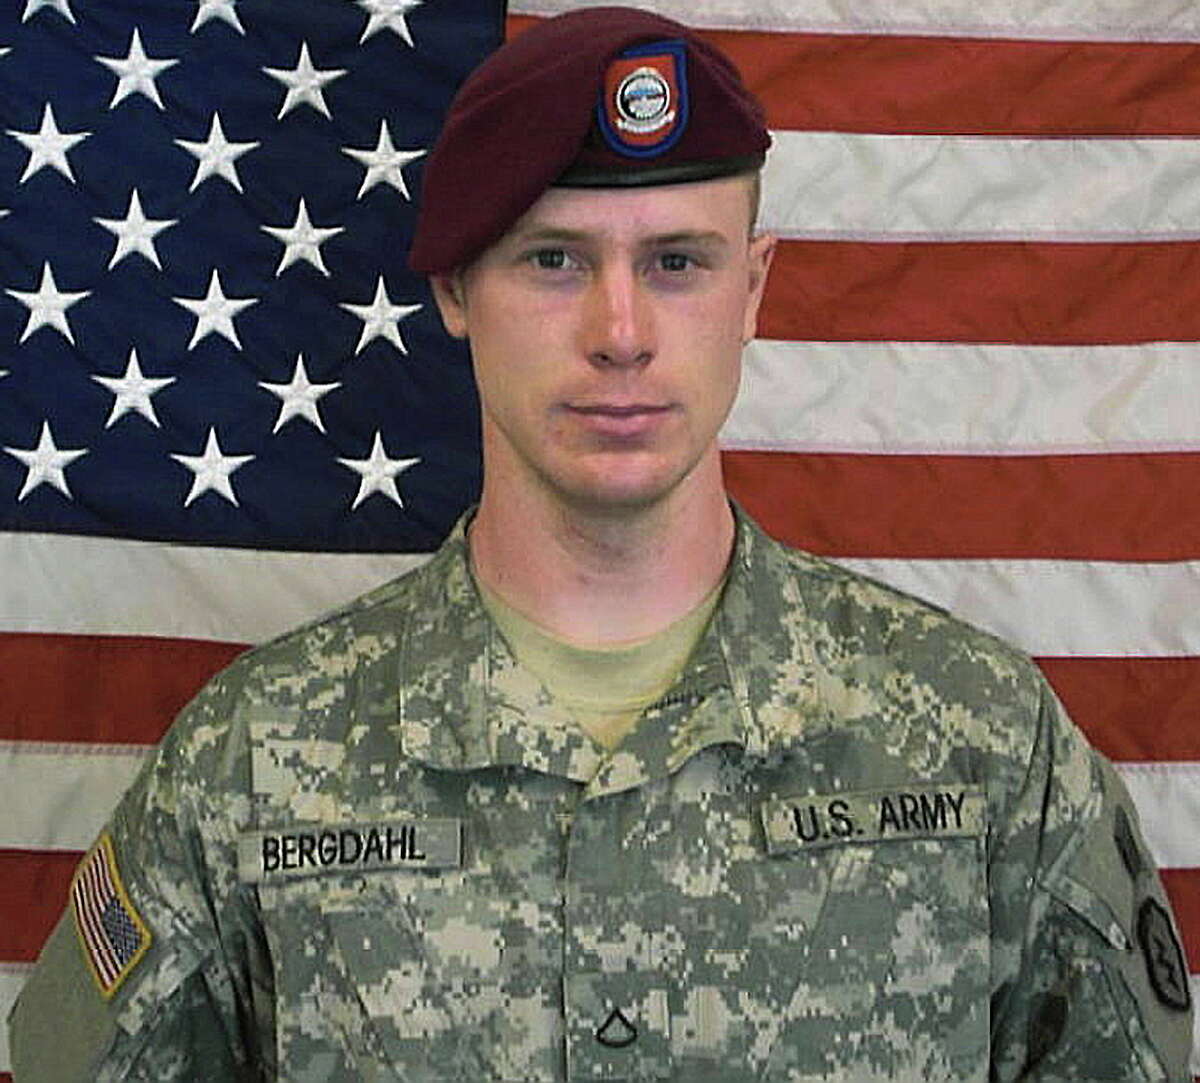 Sgt. Bowe Bergdahl, who was traded for five Taliban leaders as a prisoner of war, is being represented by Yale Law School lecturer Eugene R. Fidell.